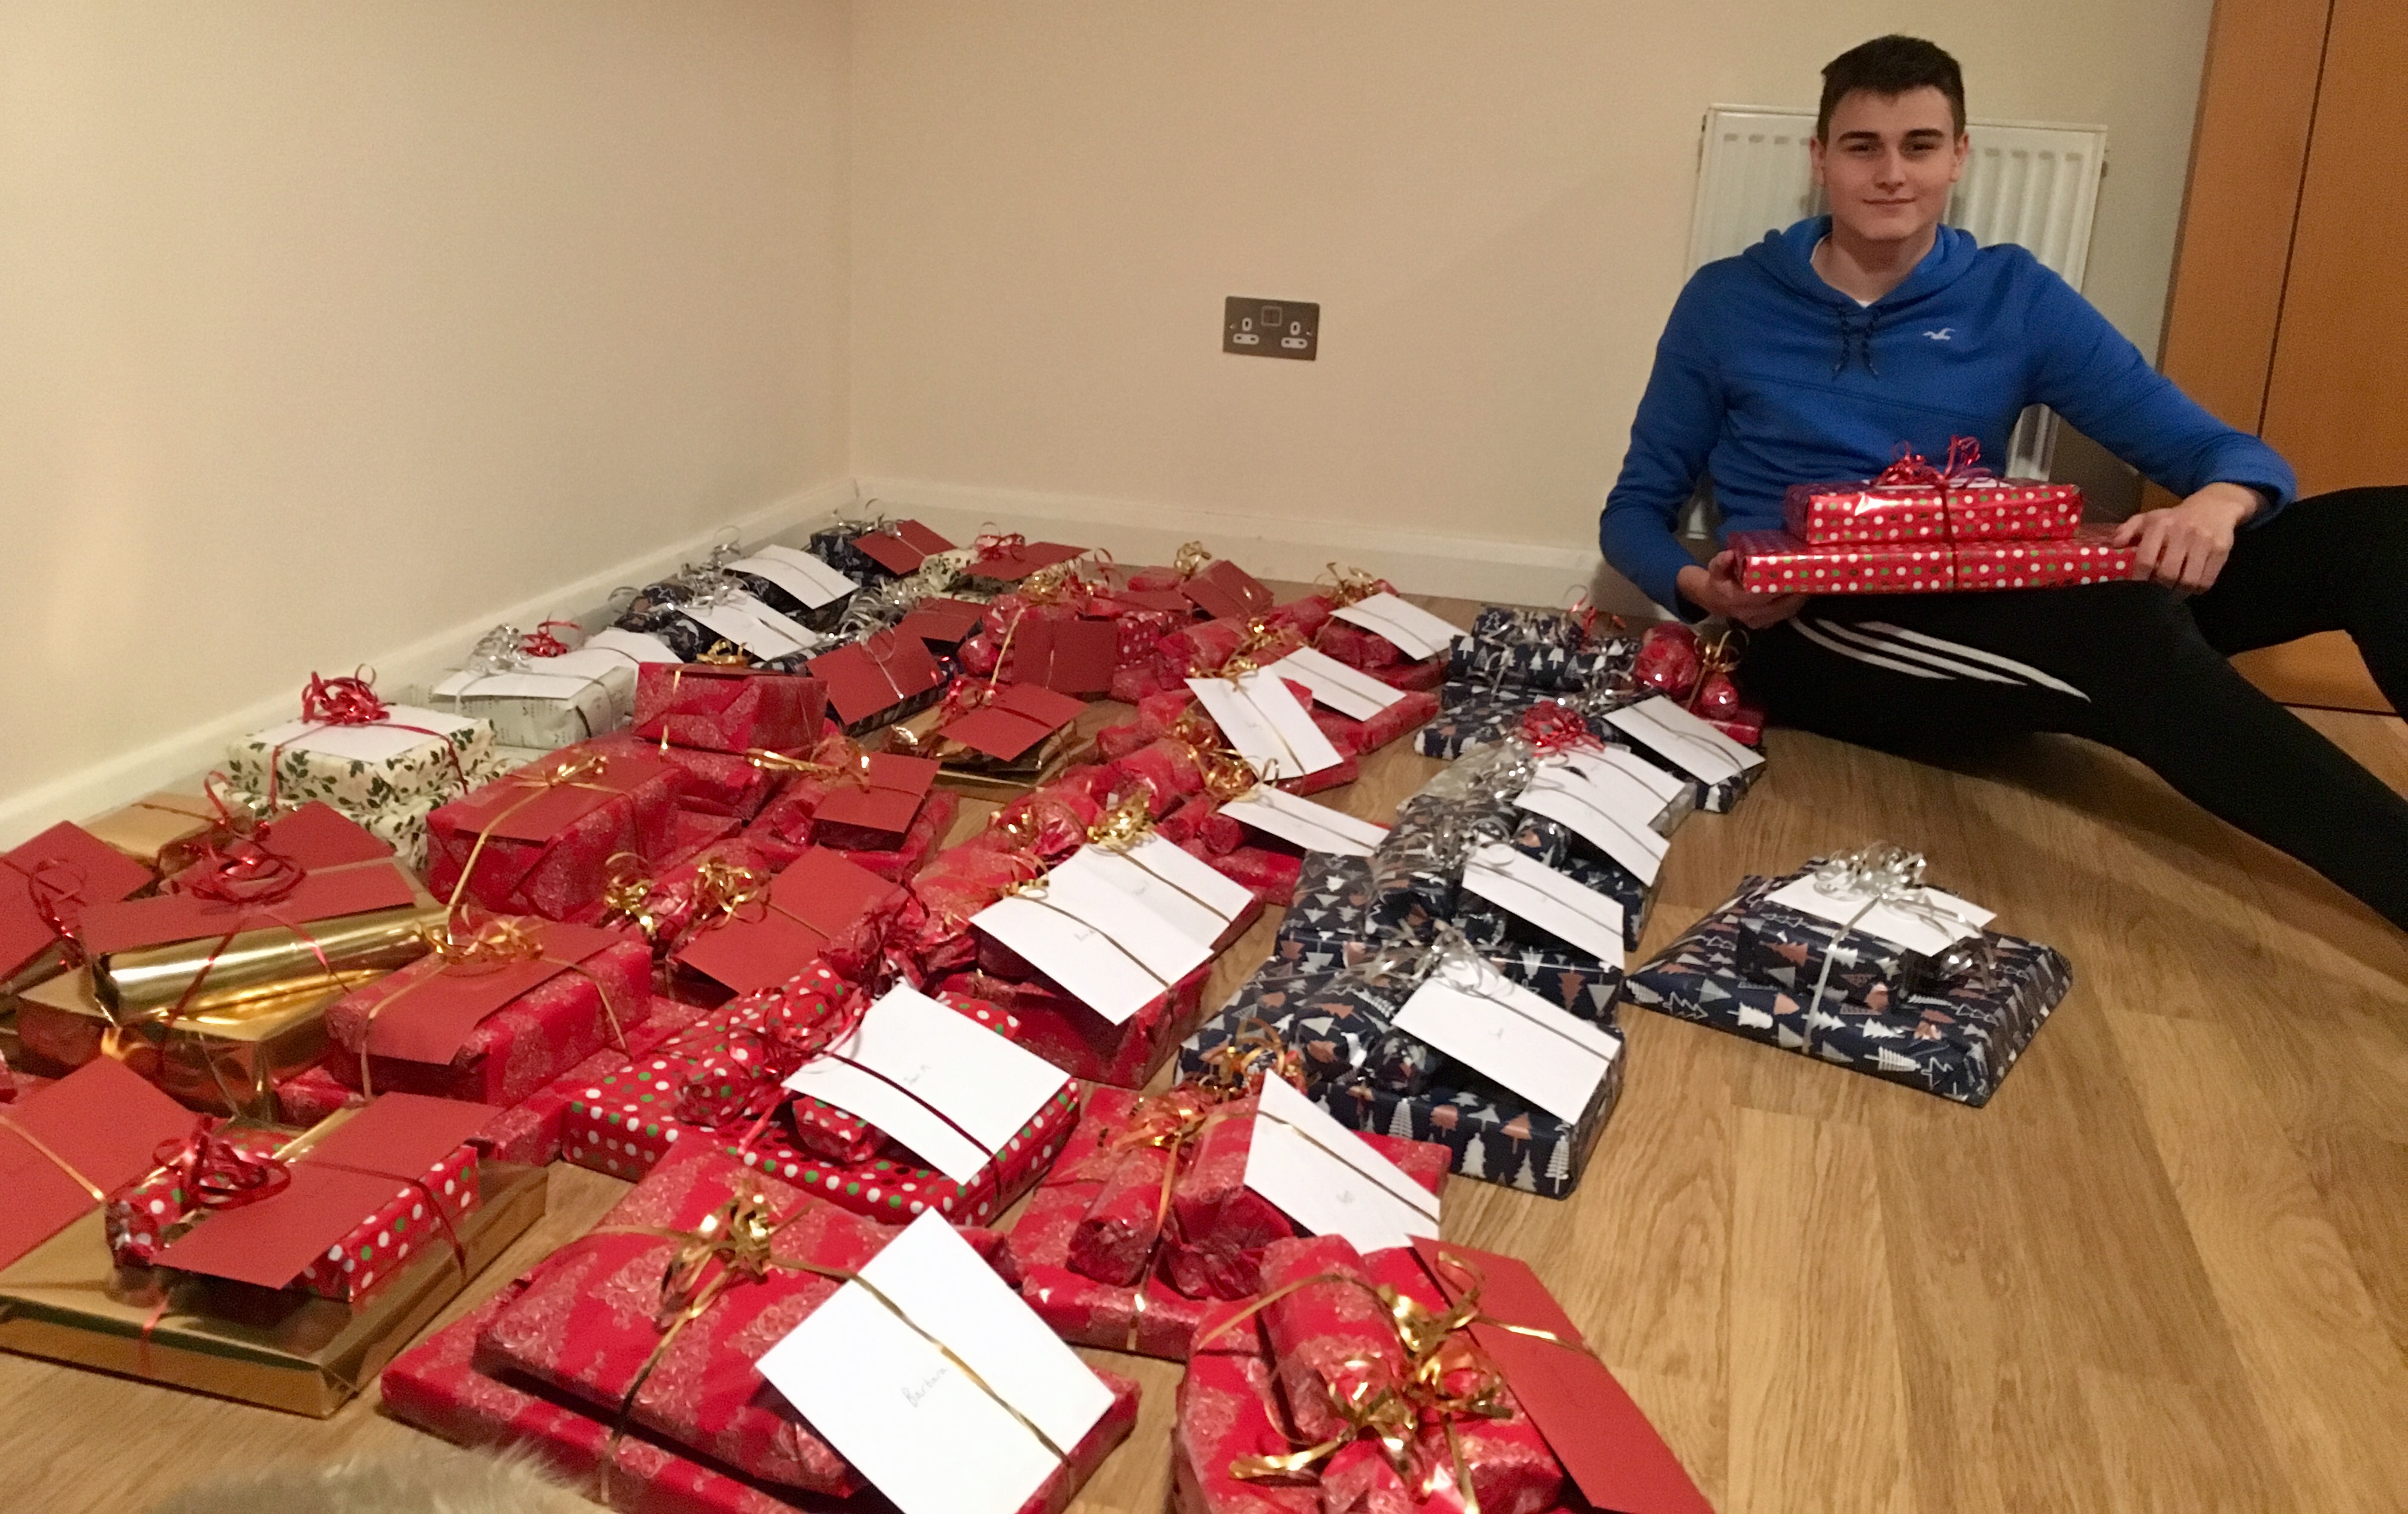 Stevan Spanovic with the presents he will give out on Christmas Day